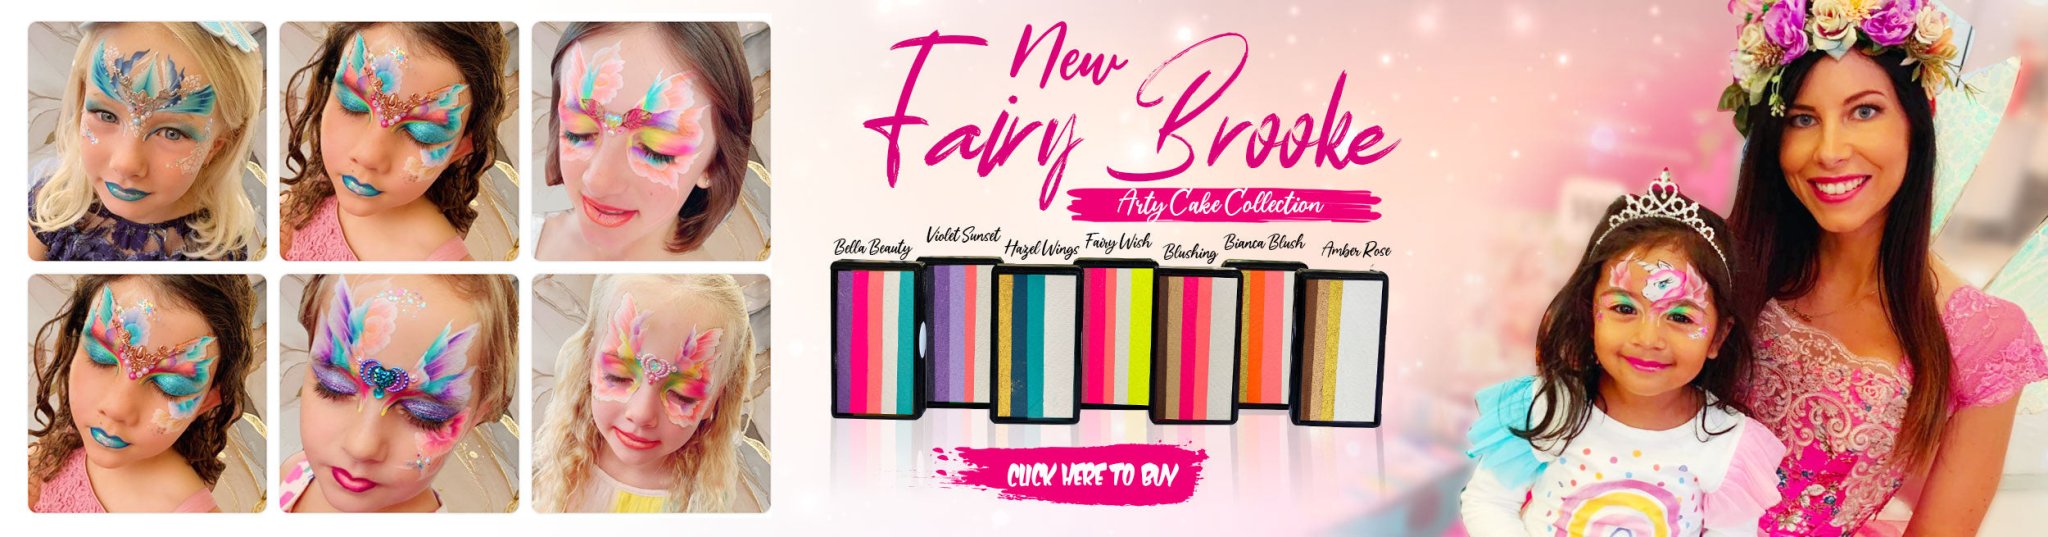 Fairy Brooke Arty Brush Cake Collection - Silly Farm Supplies